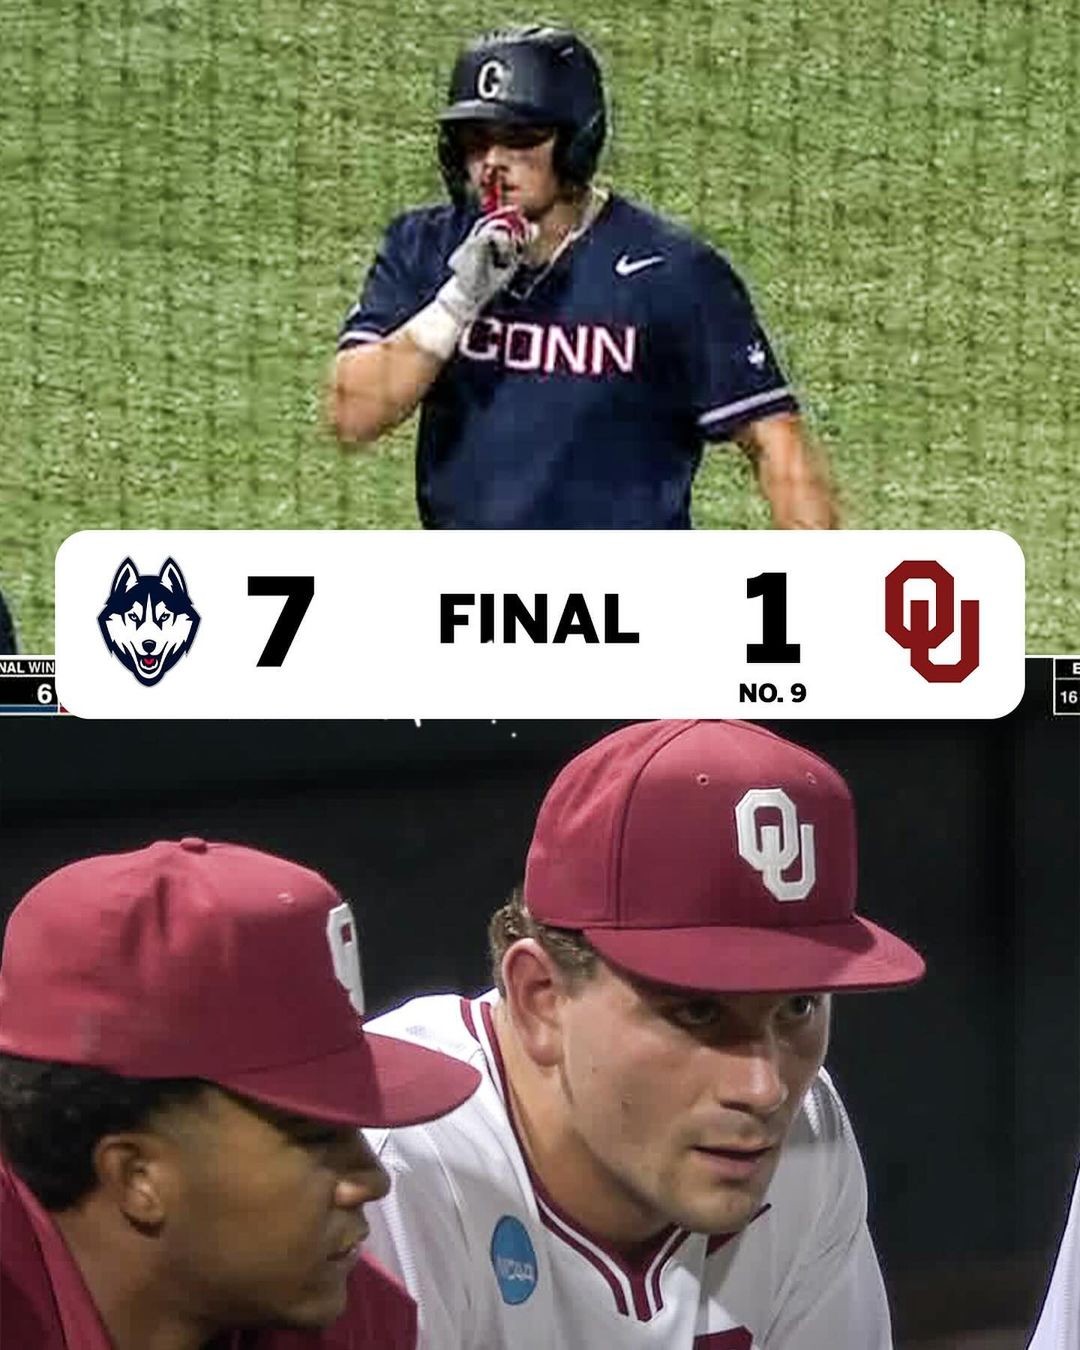 UCONN UPSETS NO. 9 OKLAHOMA IN NORMAN TO GO TO THE SUPER REGIONALS ??

(via @uconnbsb)